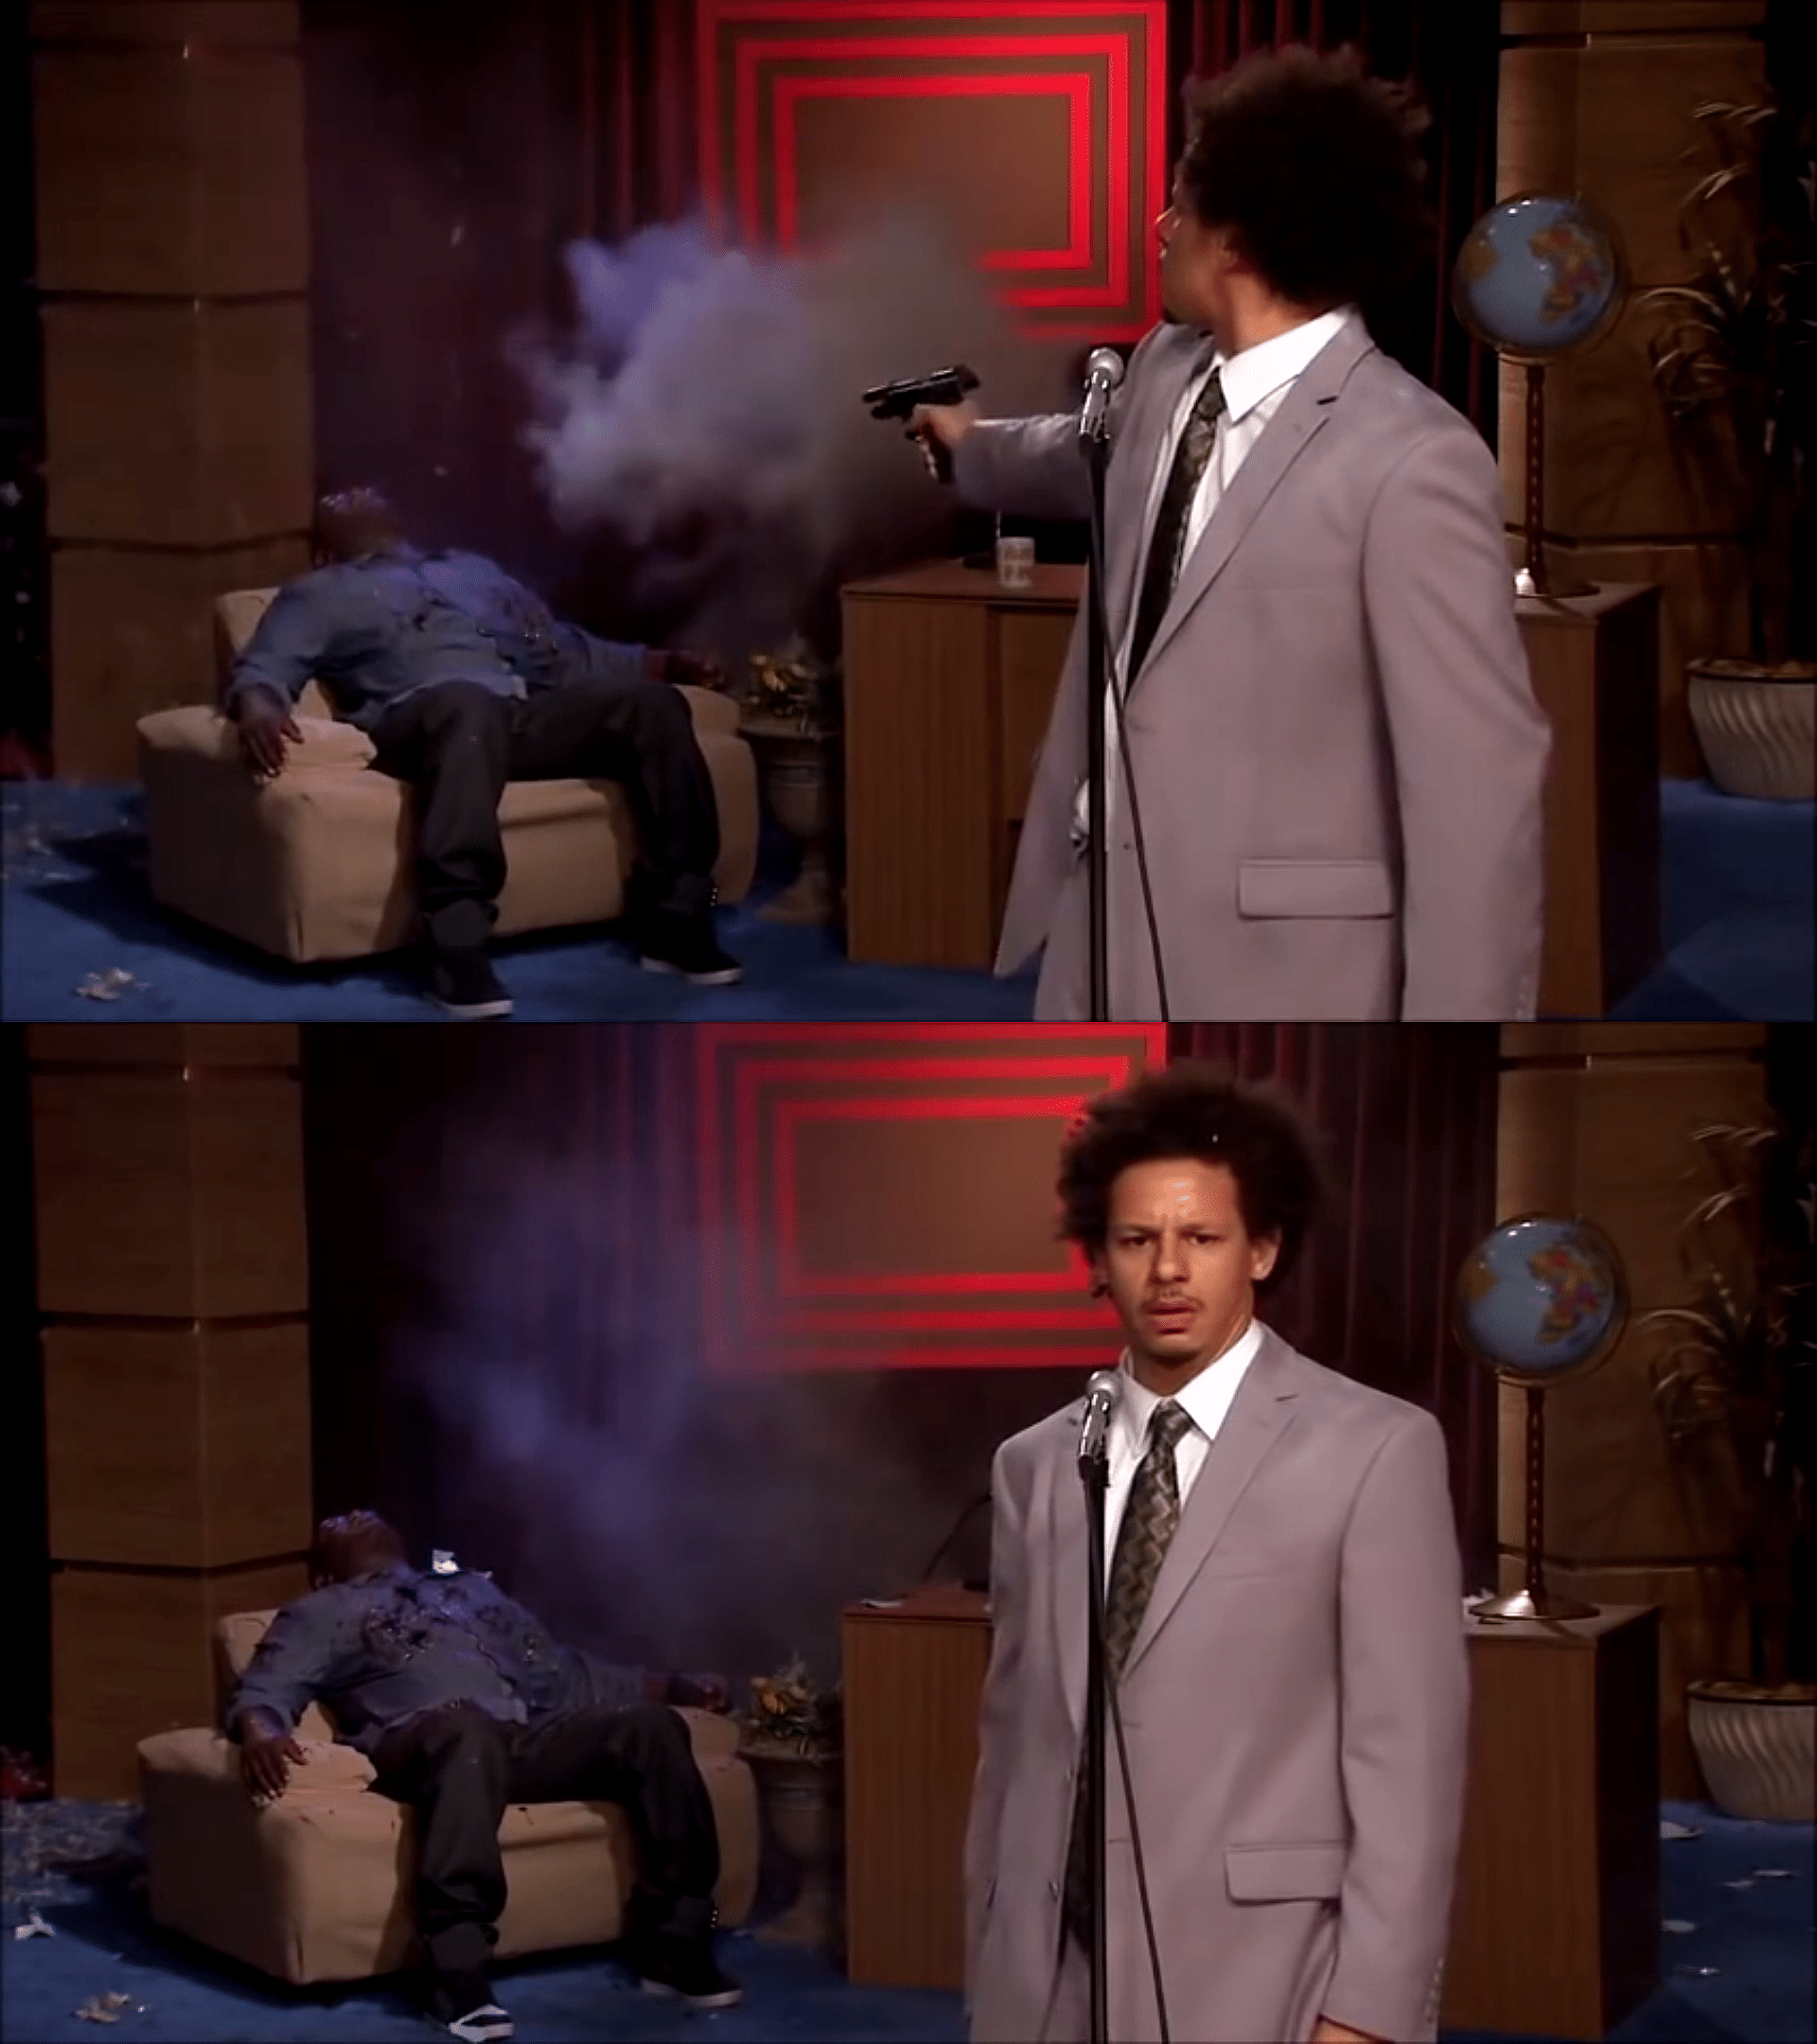 Eric Andre shoots his show sidekick Hannibal and looking confused